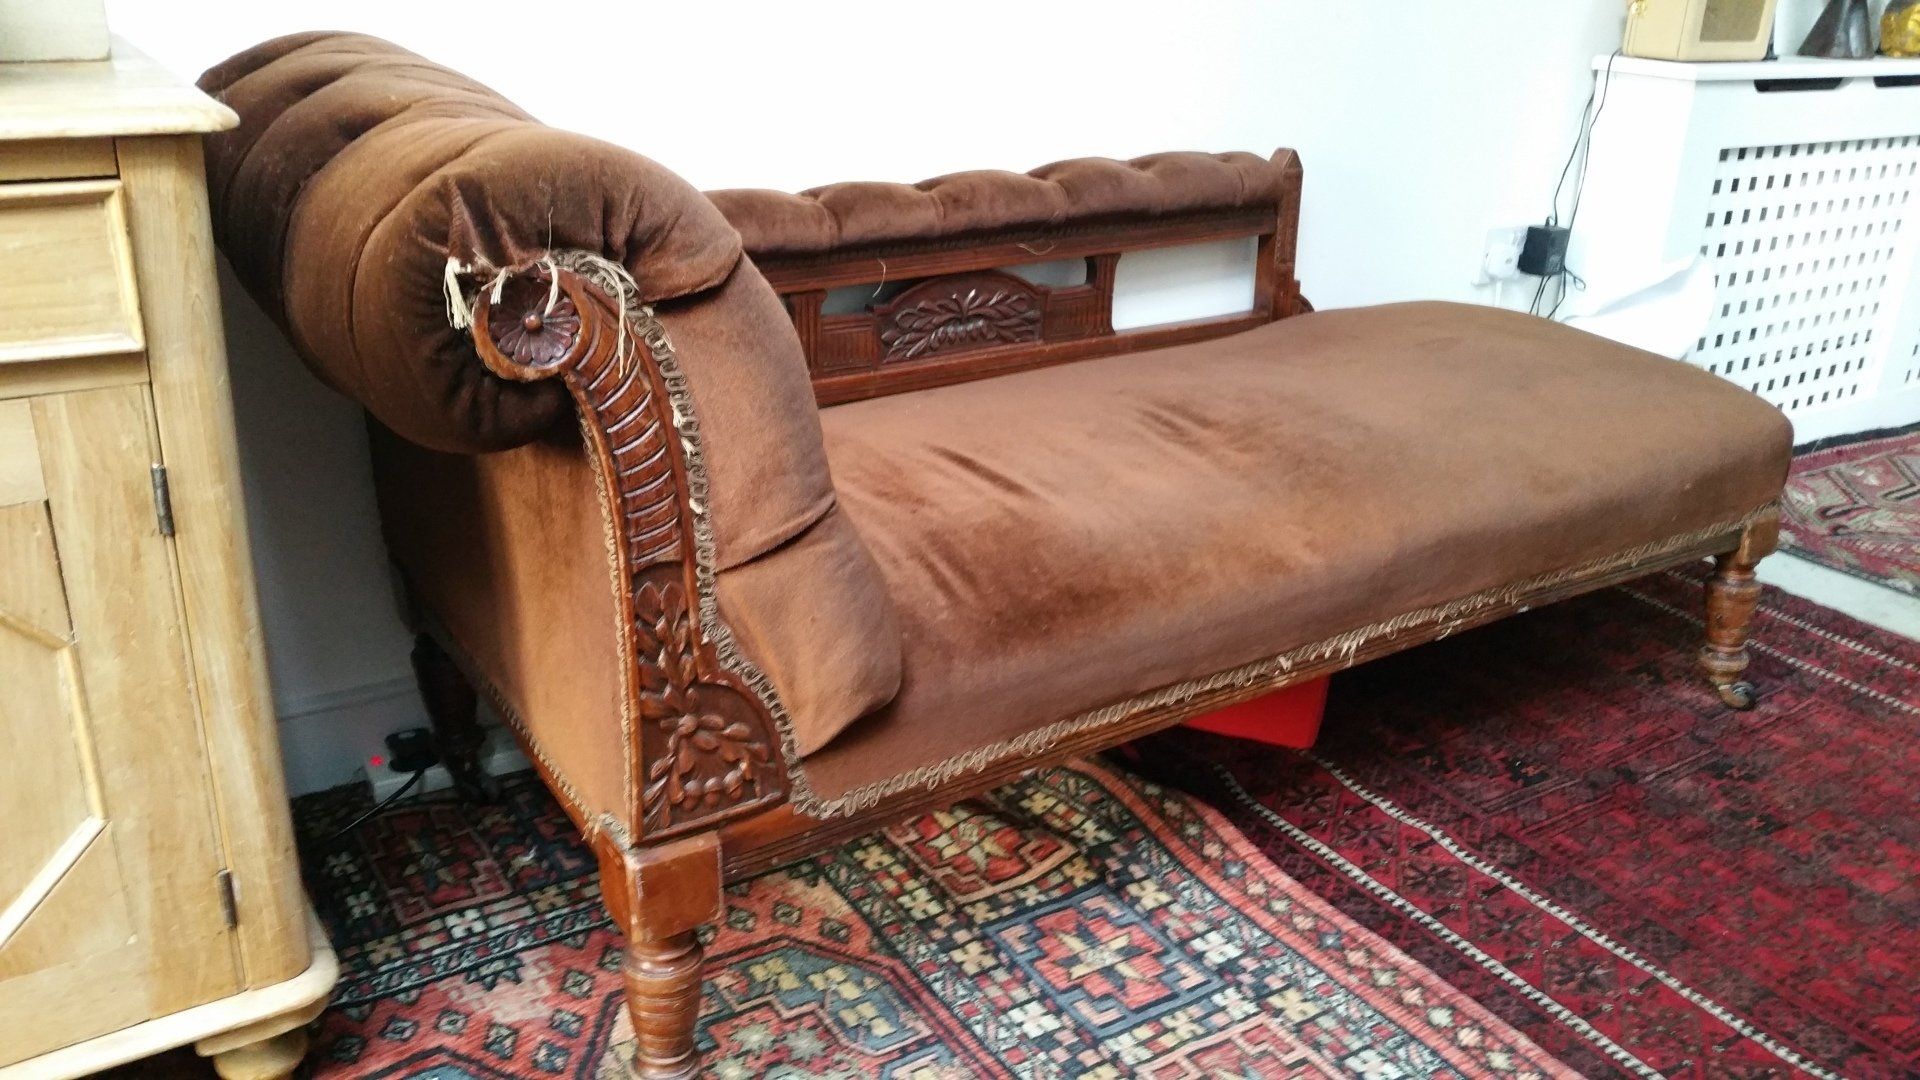 CHAISE LONGUE before